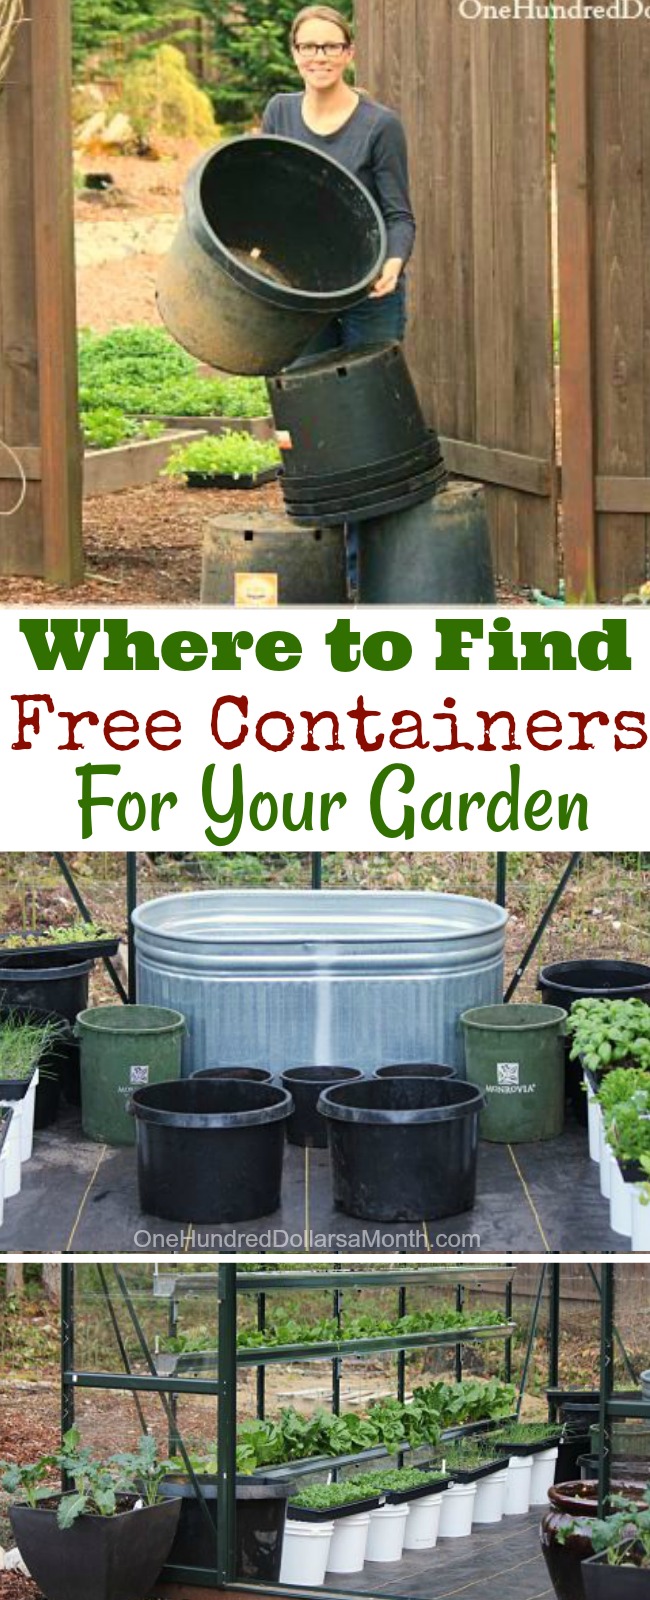 How to Find Free Containers For Your Garden